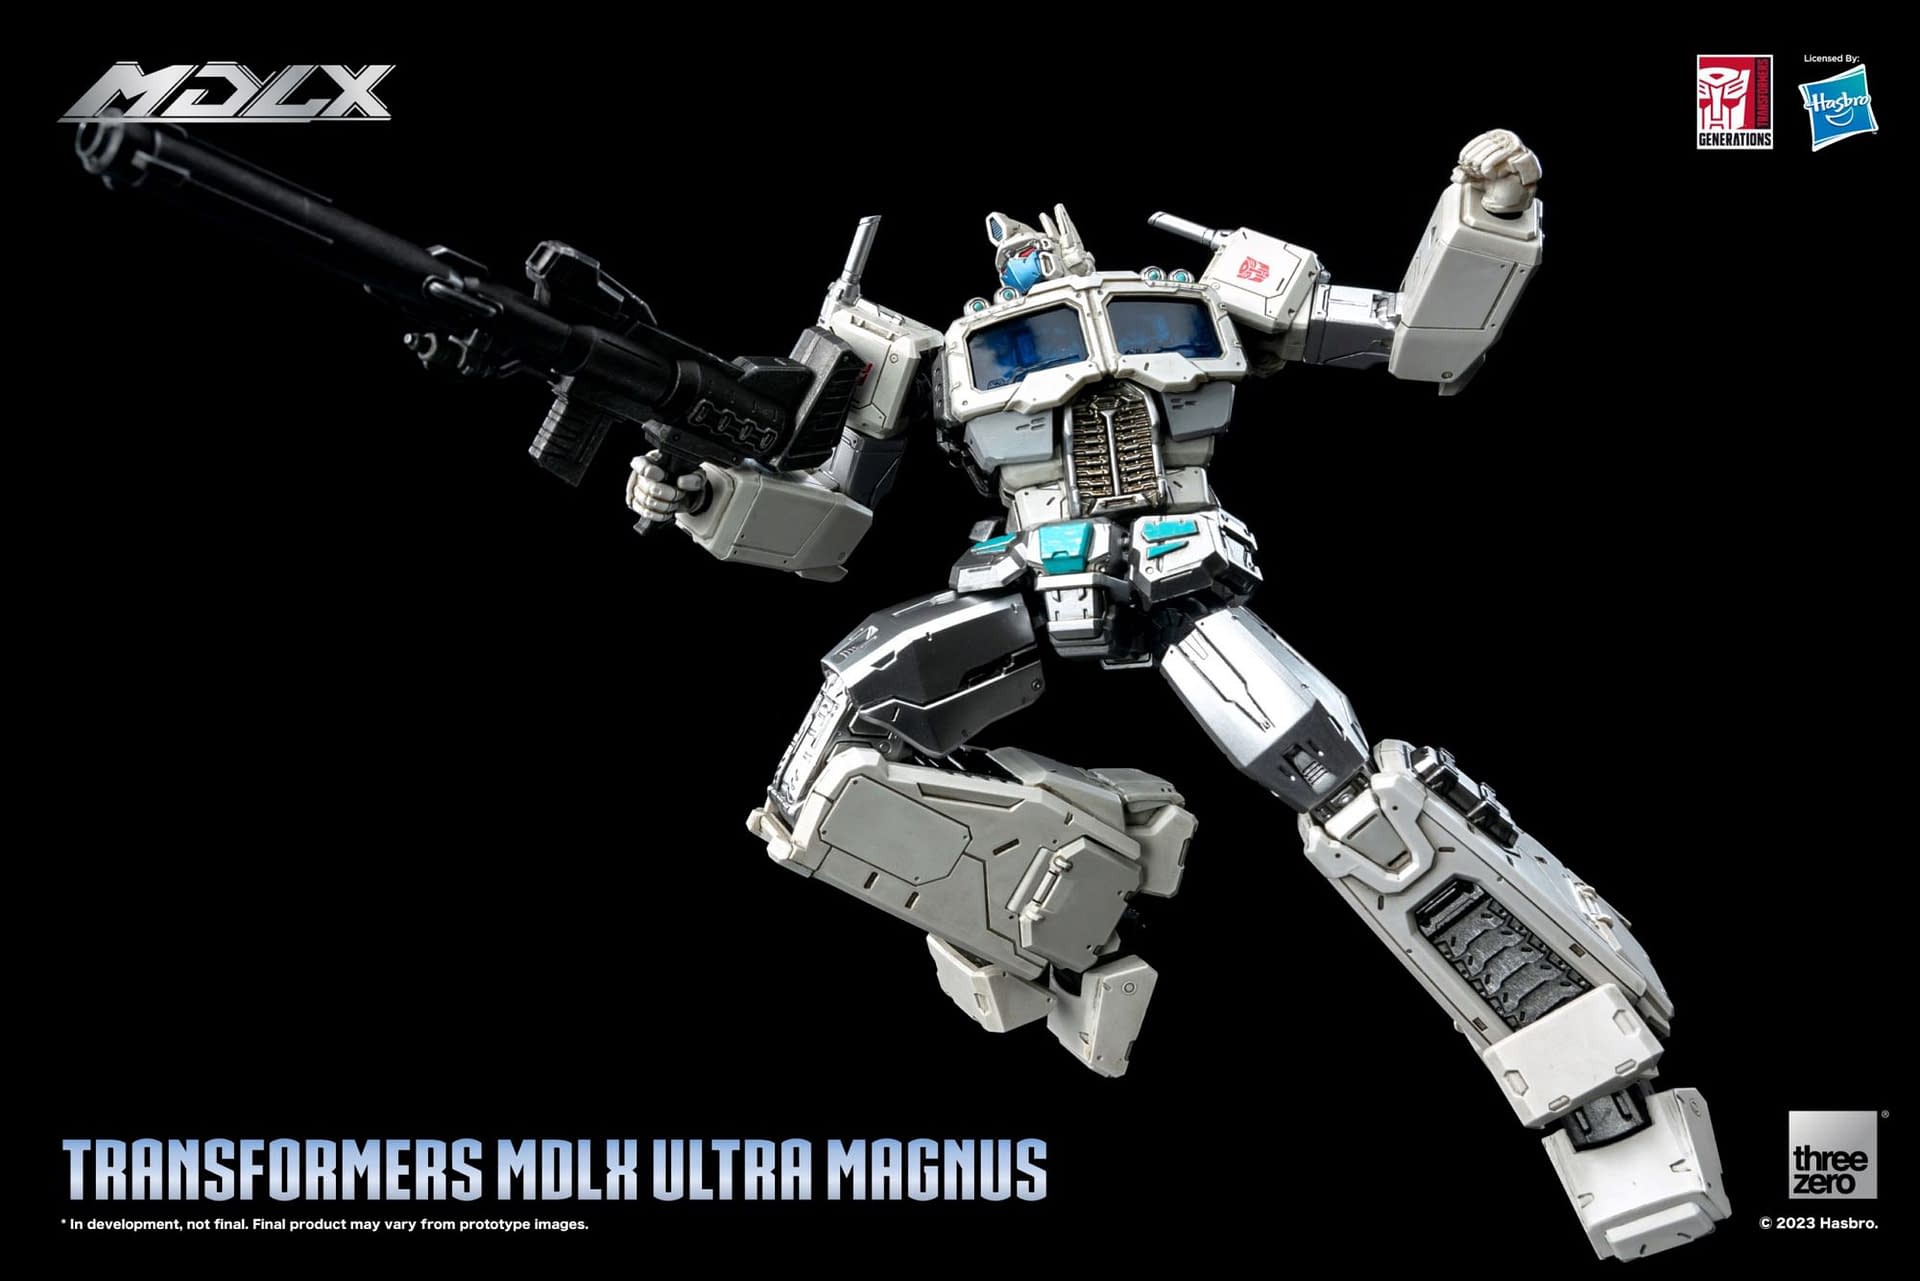 Transformers Ultra Magnus MDLX Figures Coming Soon from threezero